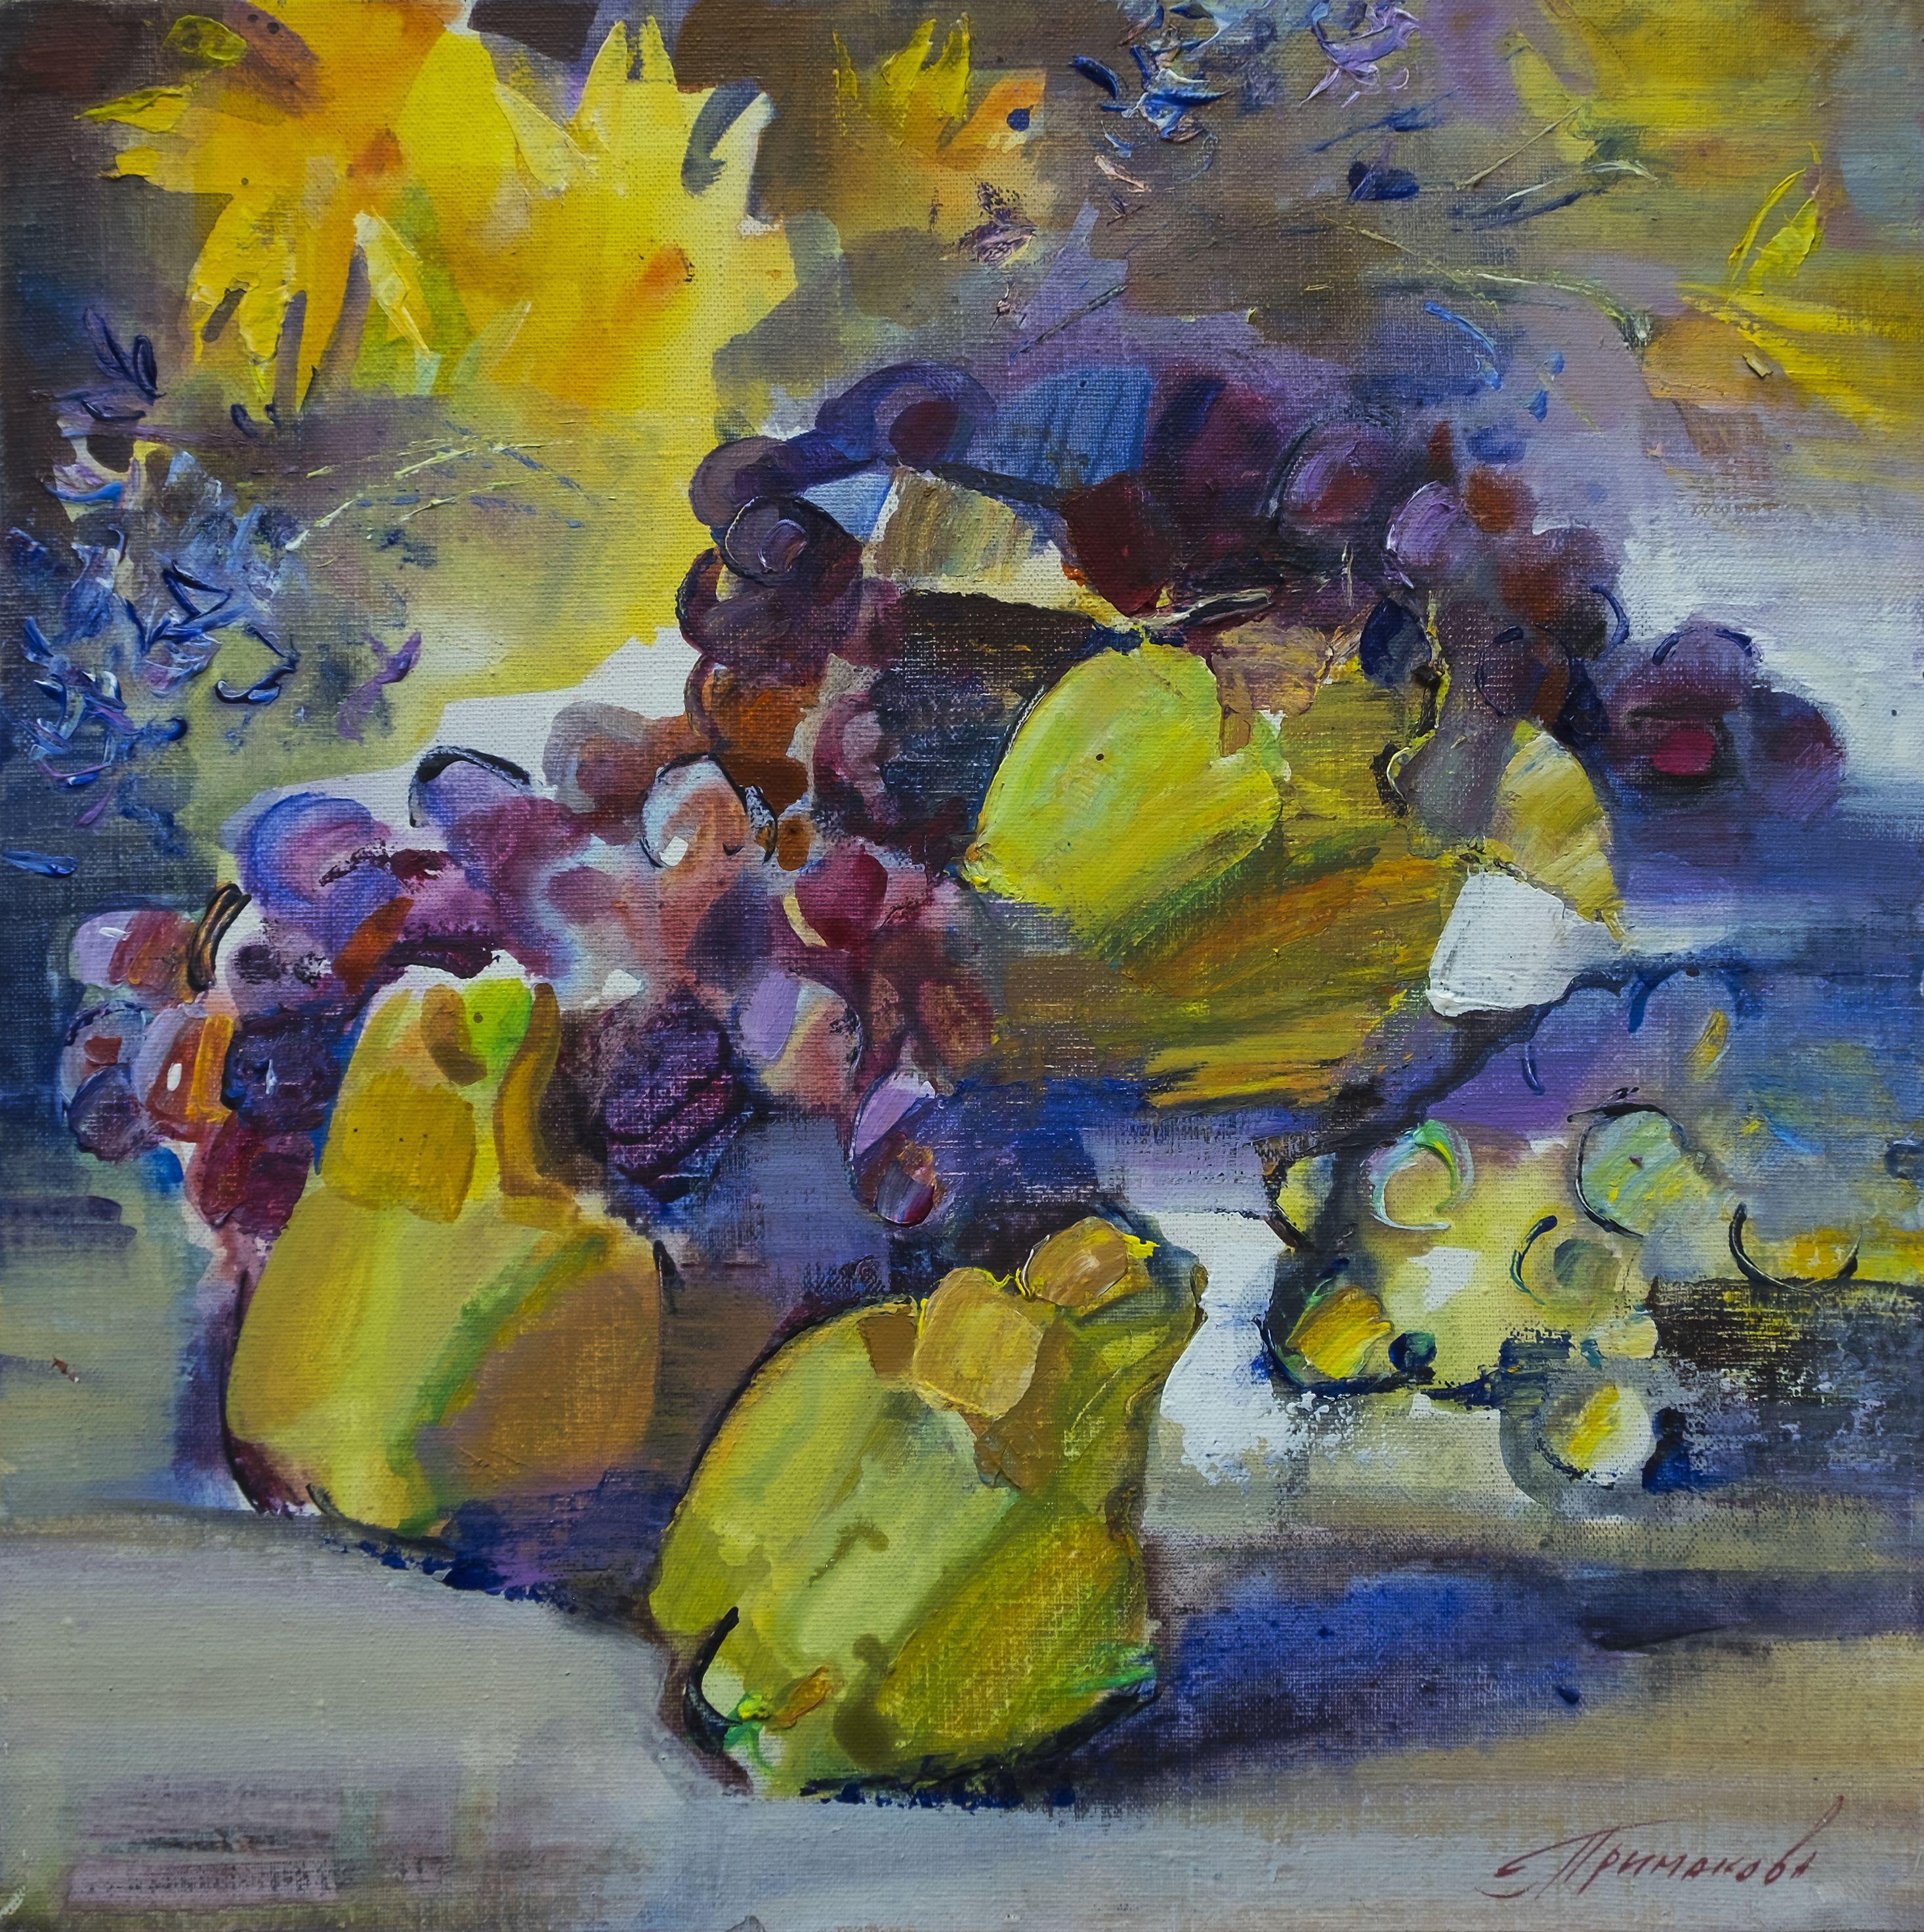 The artwork is a prominent representative of contemporary Ukrainian art, which is increasingly valued in the art world.    The artwork "Southern Sun" was made in an amazing watercolor technique with acrylic paints, which made it possible to see